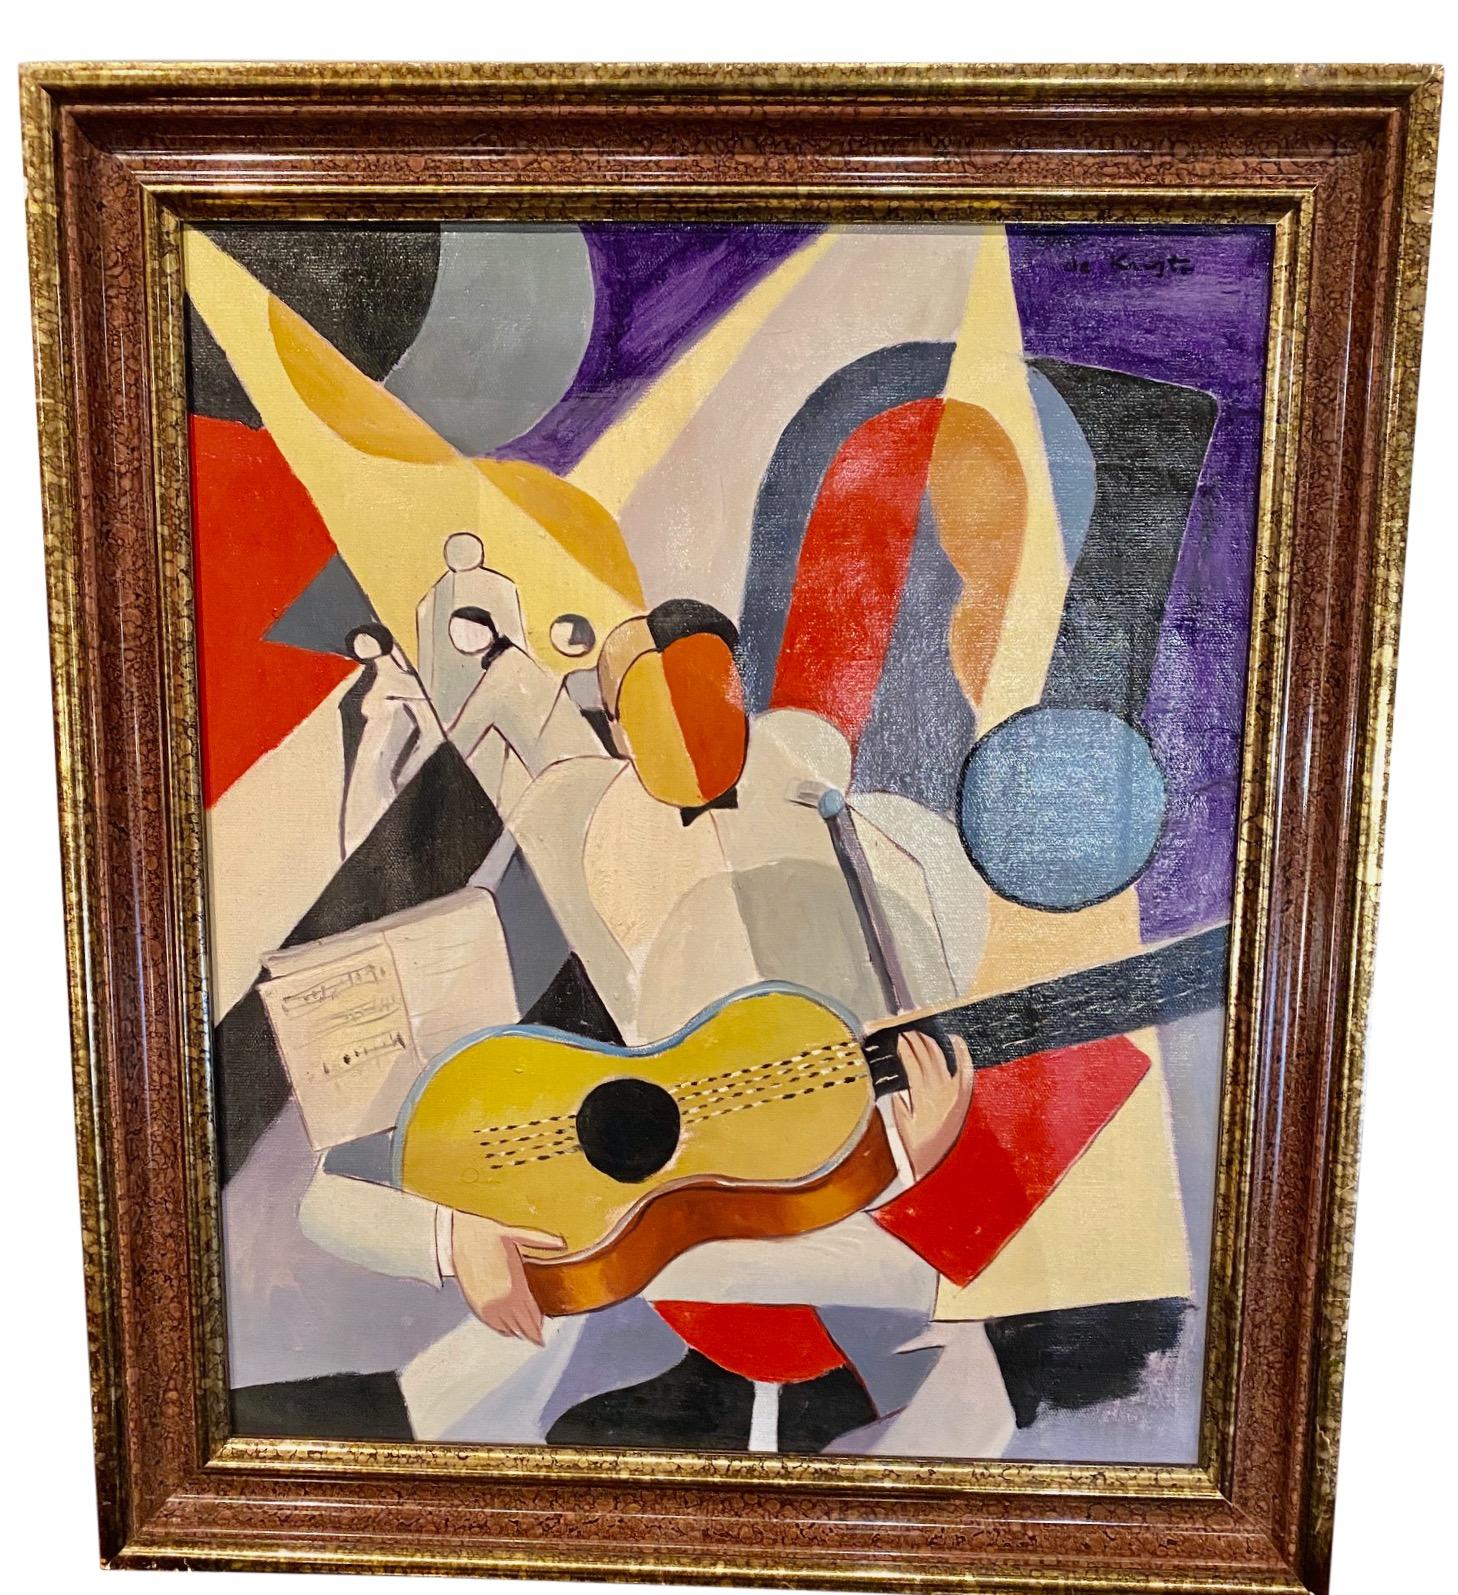 Bela De Kristo Art Deco Cubist Oil on Canvas Man Playing Guitar In Good Condition For Sale In Oakland, CA